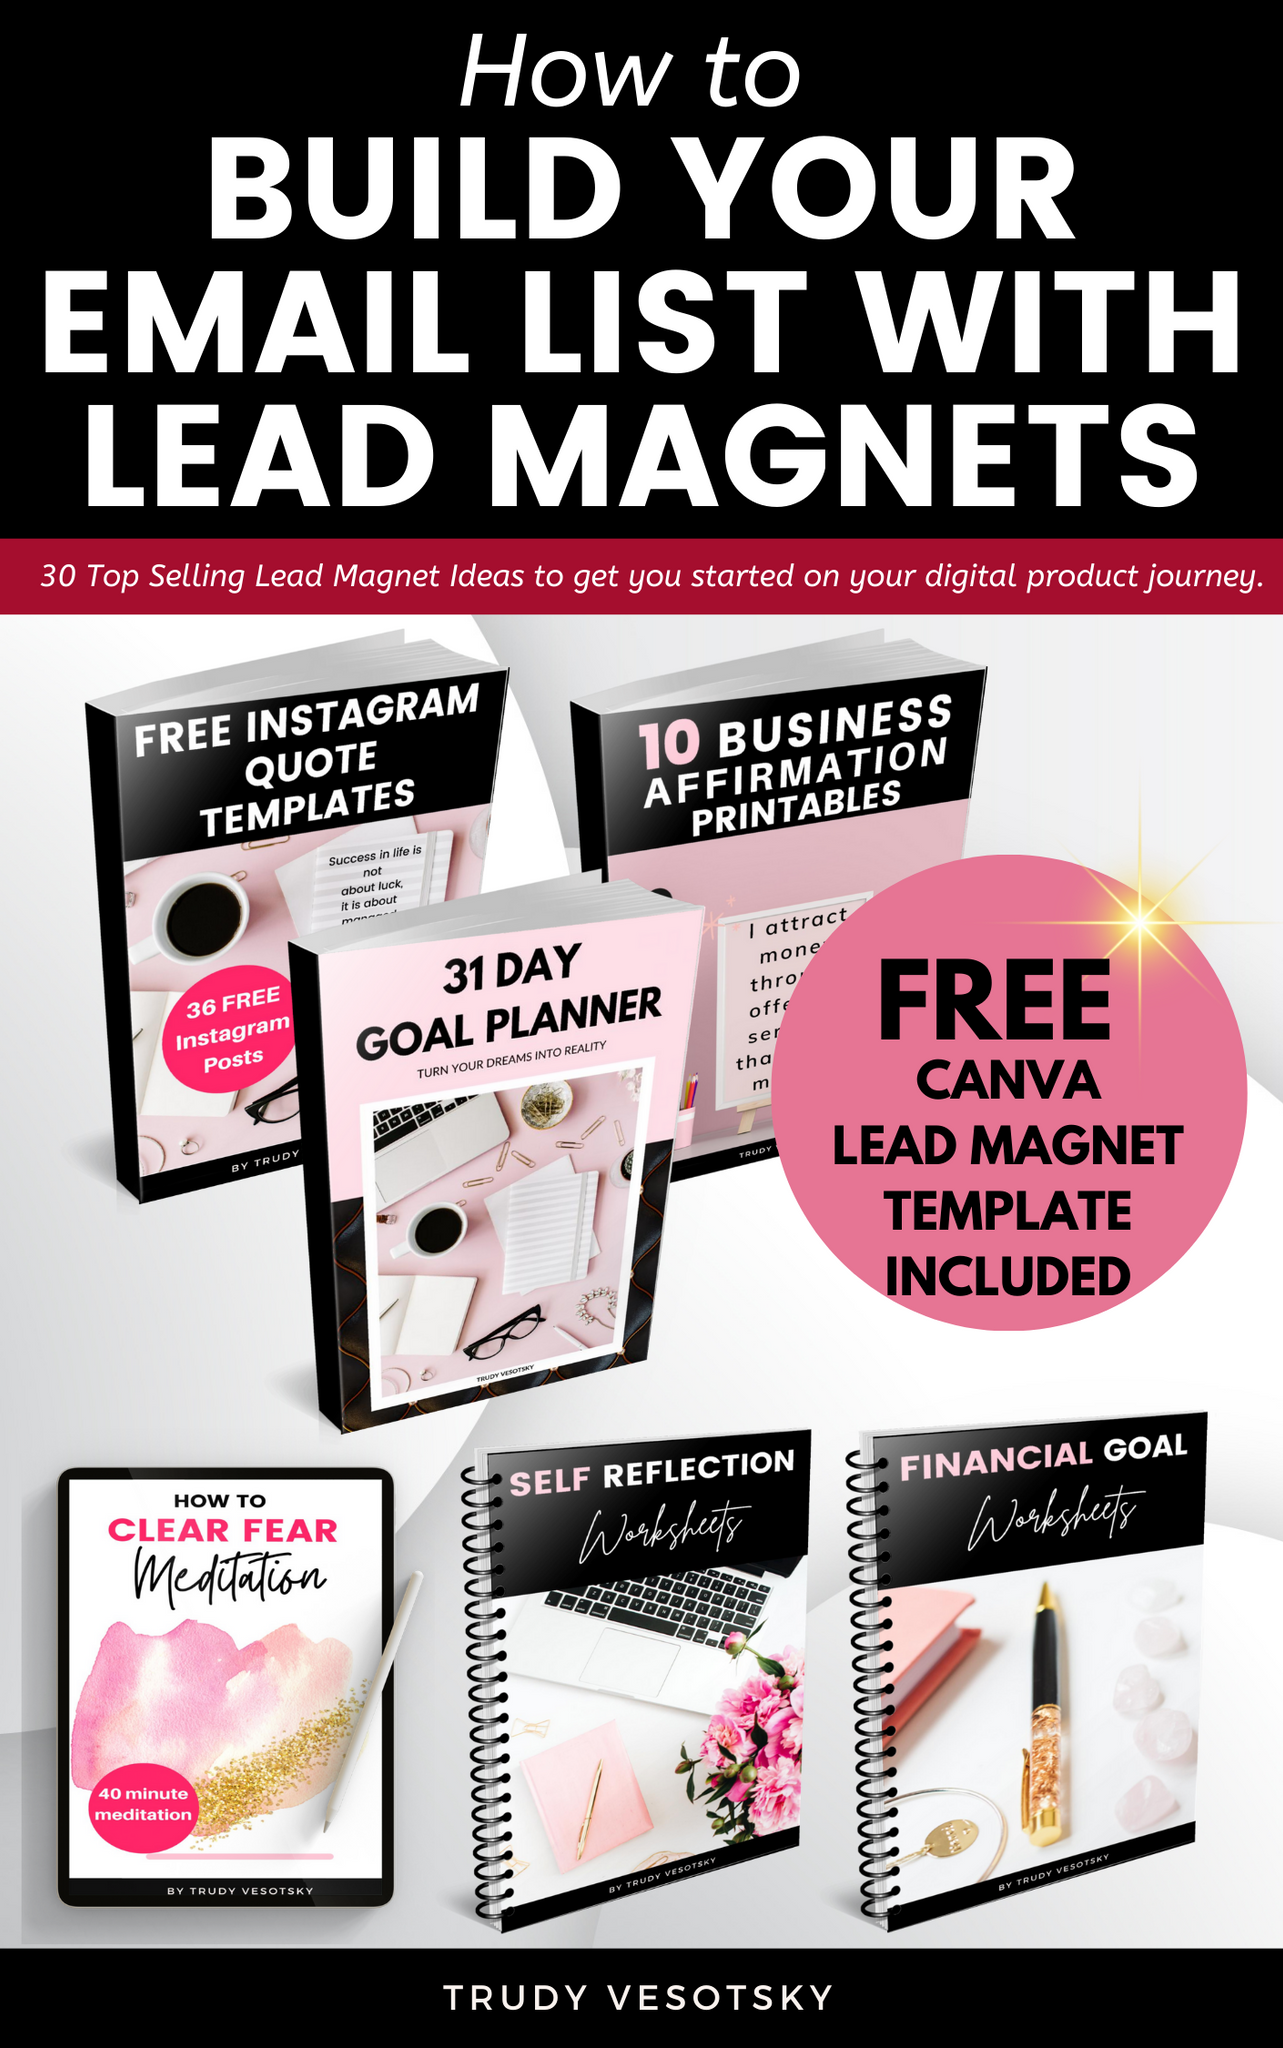 How to Build Your Email List with Lead Magnets